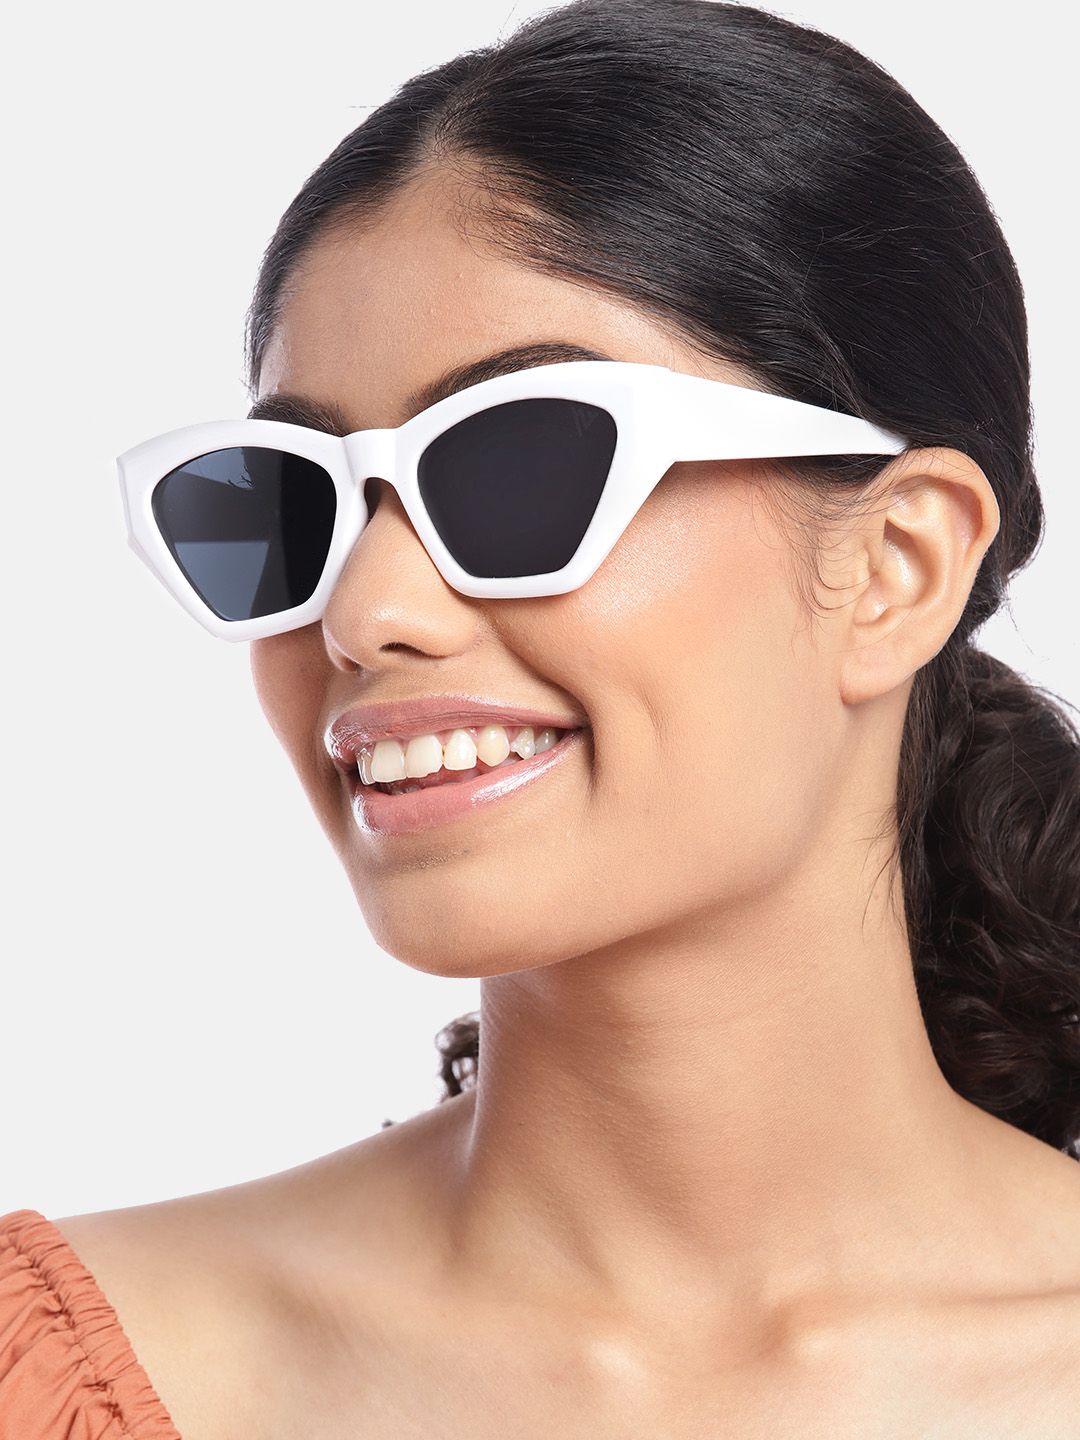 Voyage Women Black Lens & White Cateye Sunglasses with UV Protected Lens Price in India